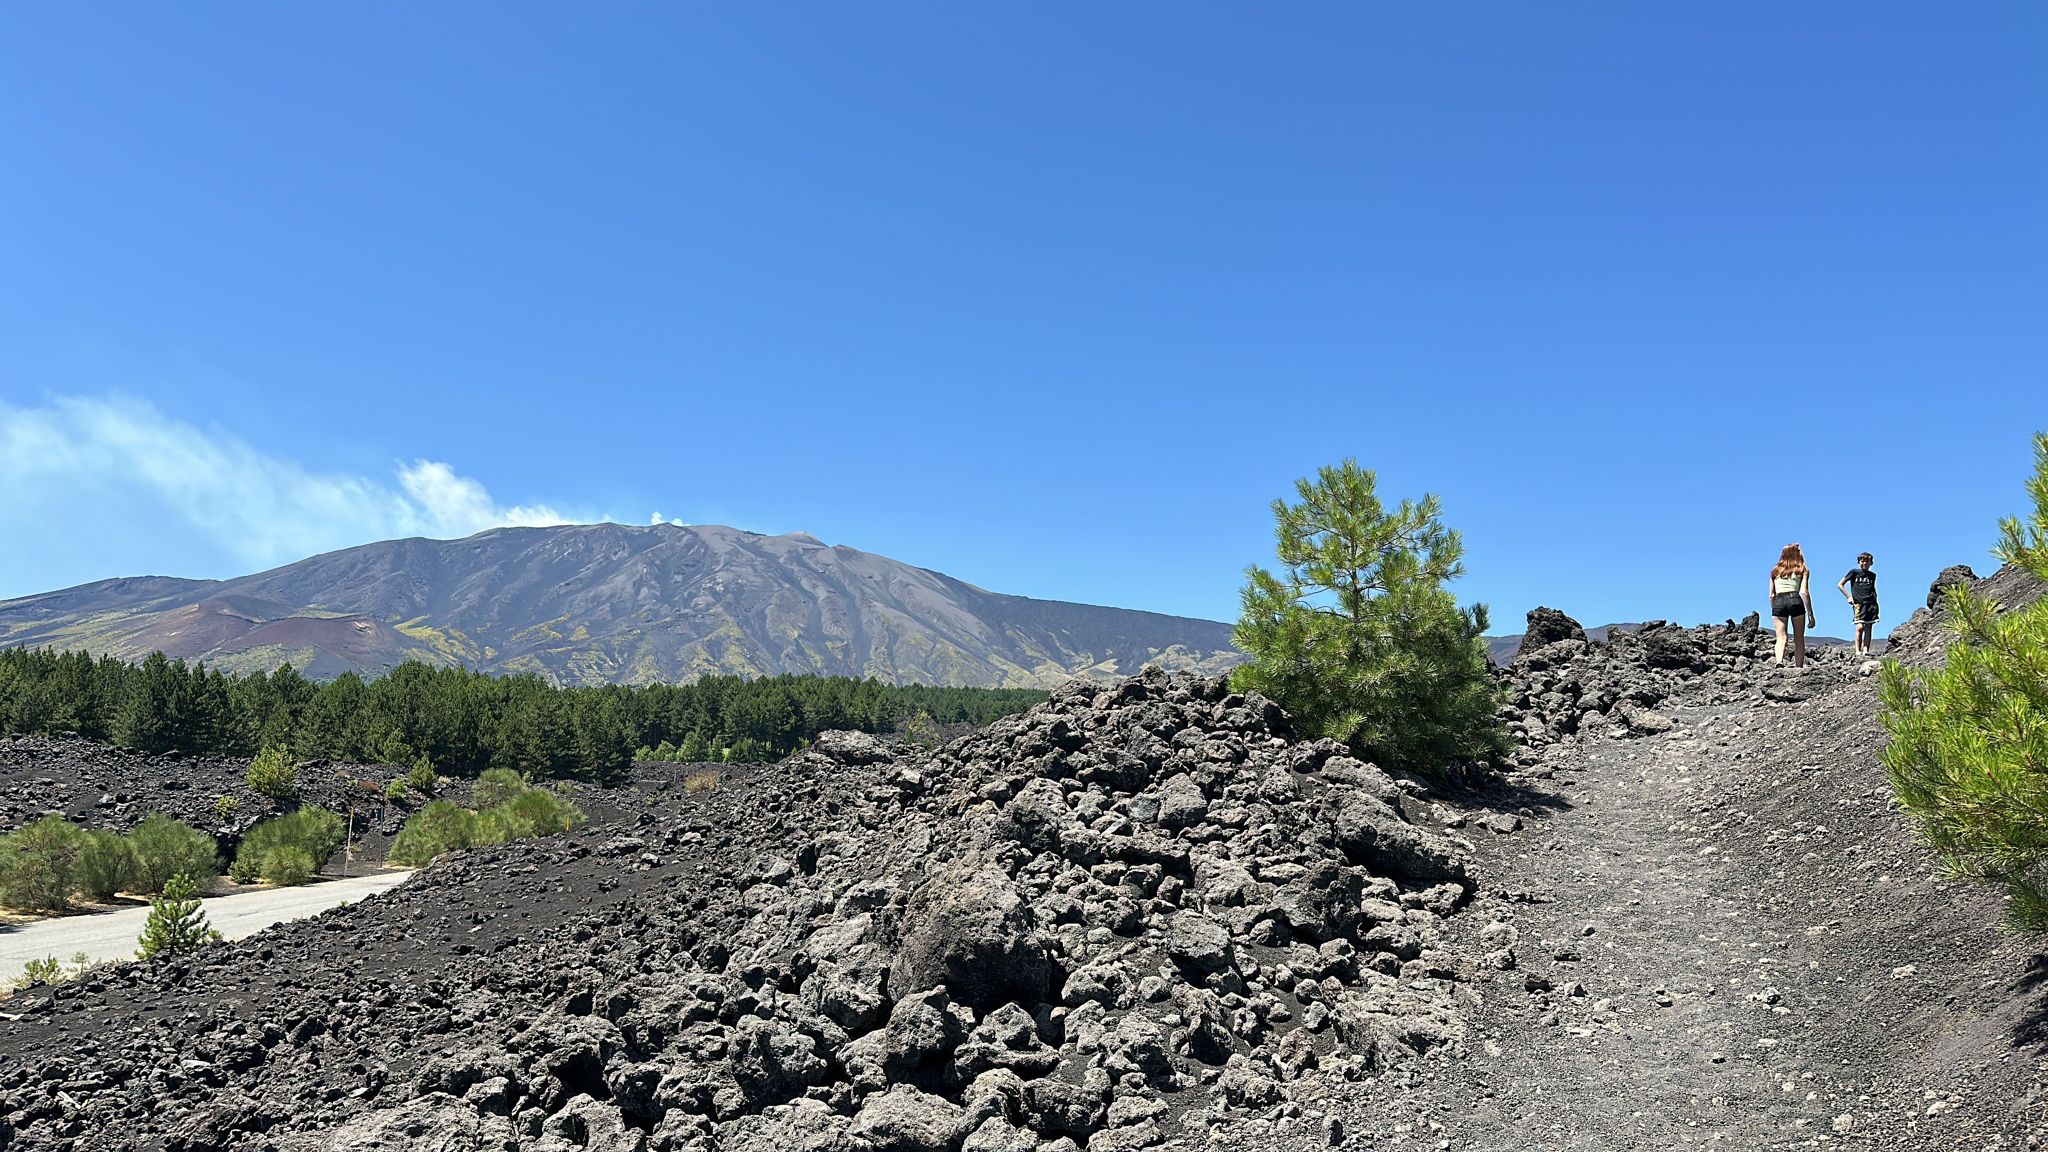 Hiking near the Alcantara Gorges with view on Mount Etna